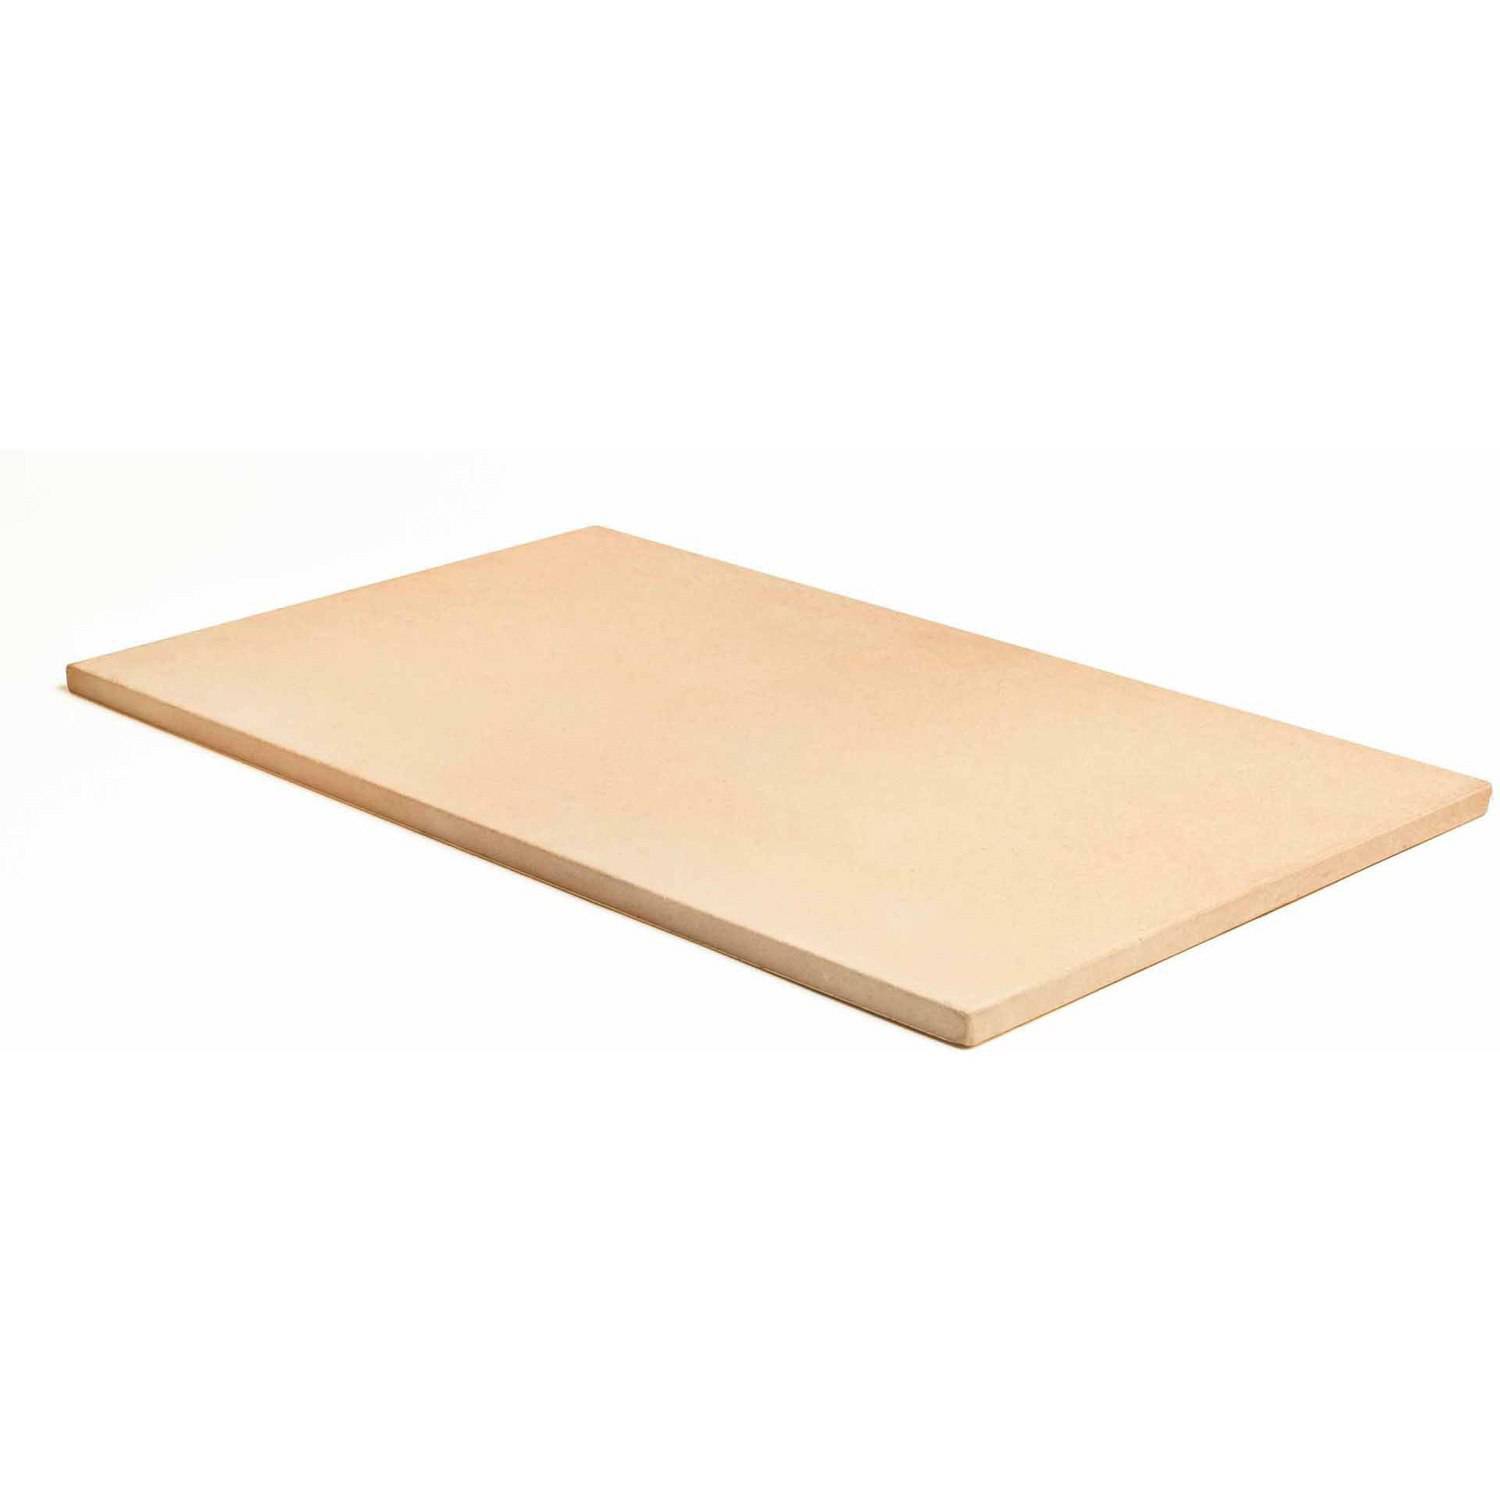 Pizzacraft Rectangular Cordierite Baking/Pizza Stone for Oven or Grill, 20"x13.5" - PC0102 - image 1 of 5